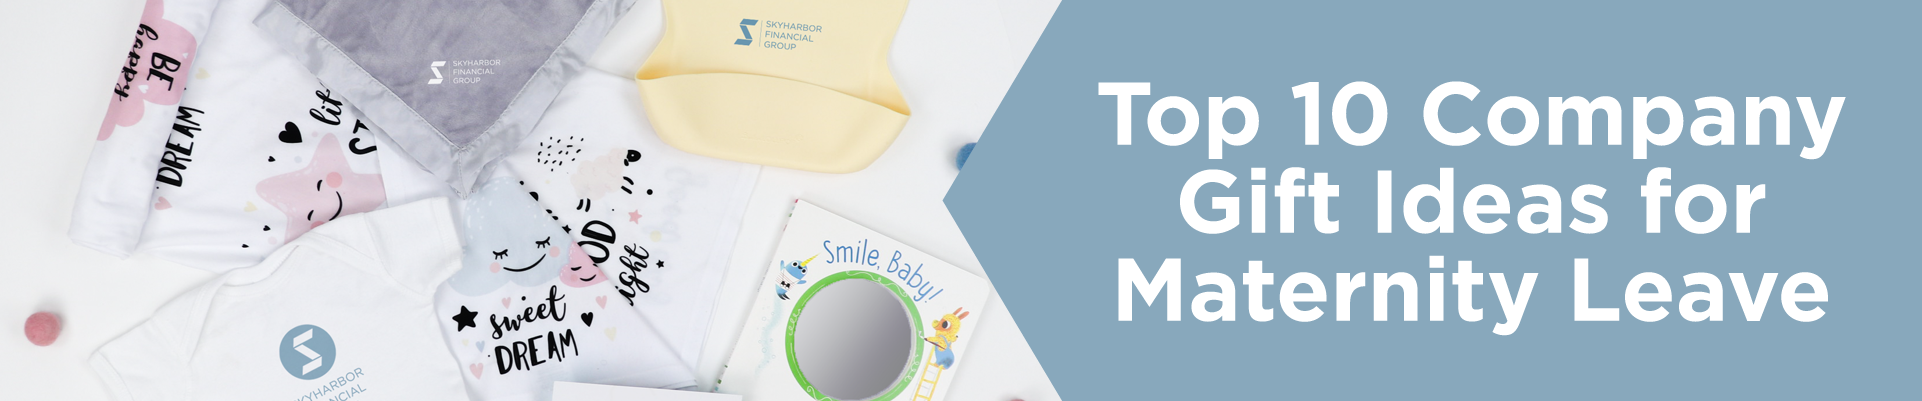 Top 10 Company Gifts for Maternity Leave